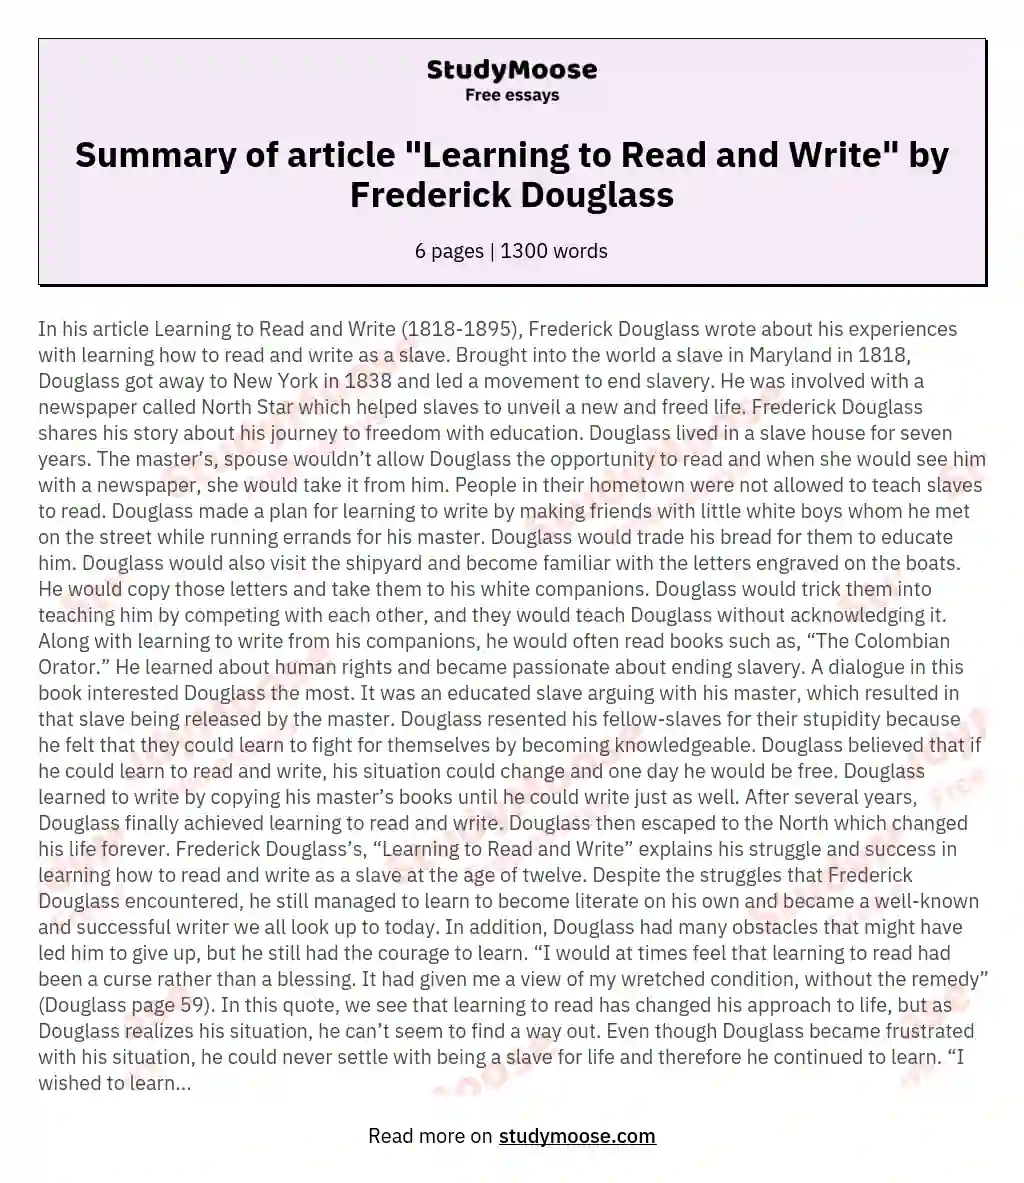 Summary of article "Learning to Read and Write" by Frederick Douglass essay